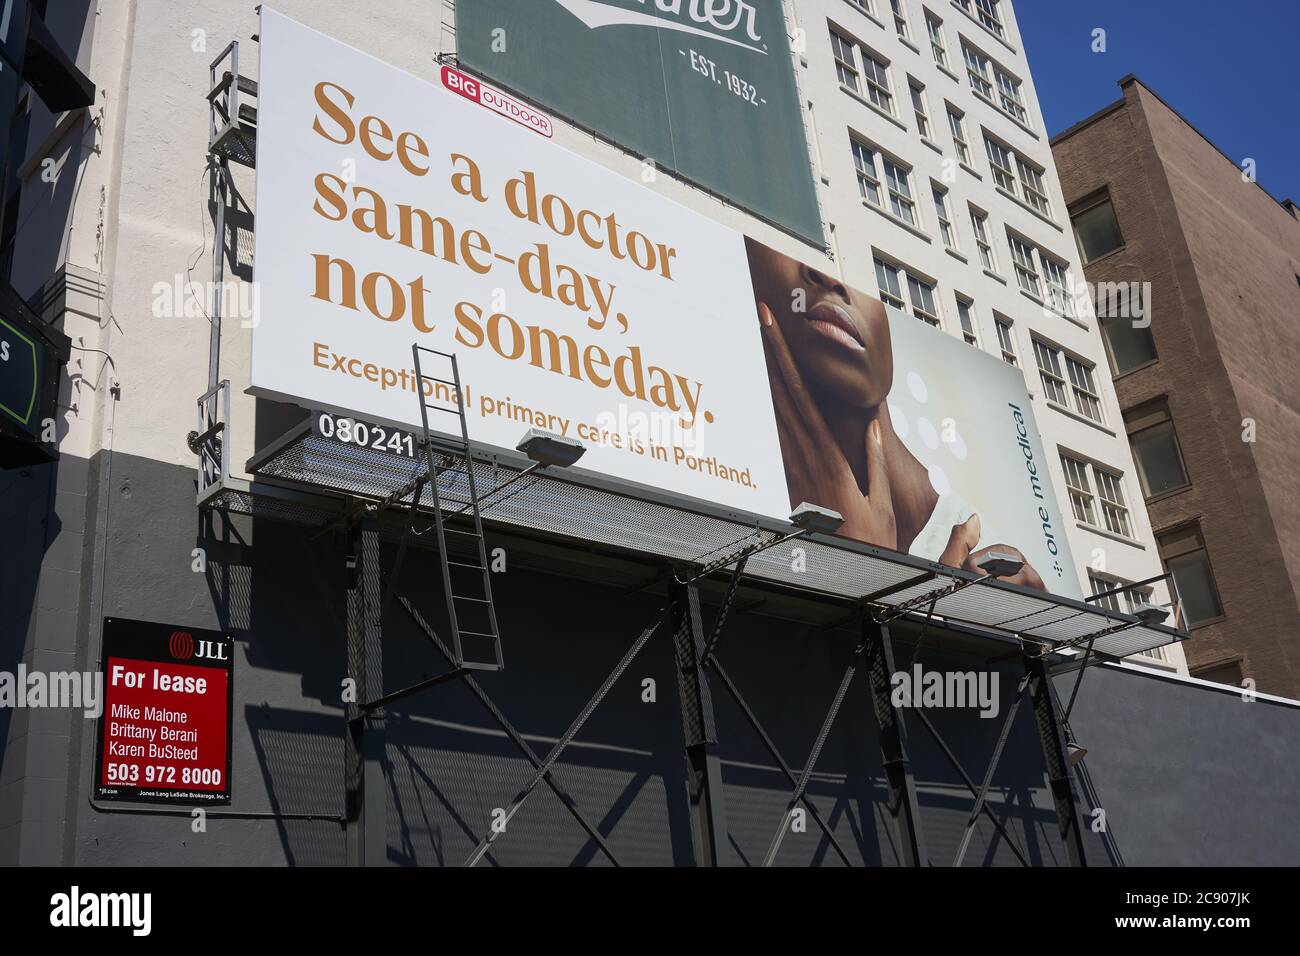 The modernized direct-to-consumer membership-based primary care platform, One Medical's billboard is seen in downtown Portland, Oregon. Stock Photo